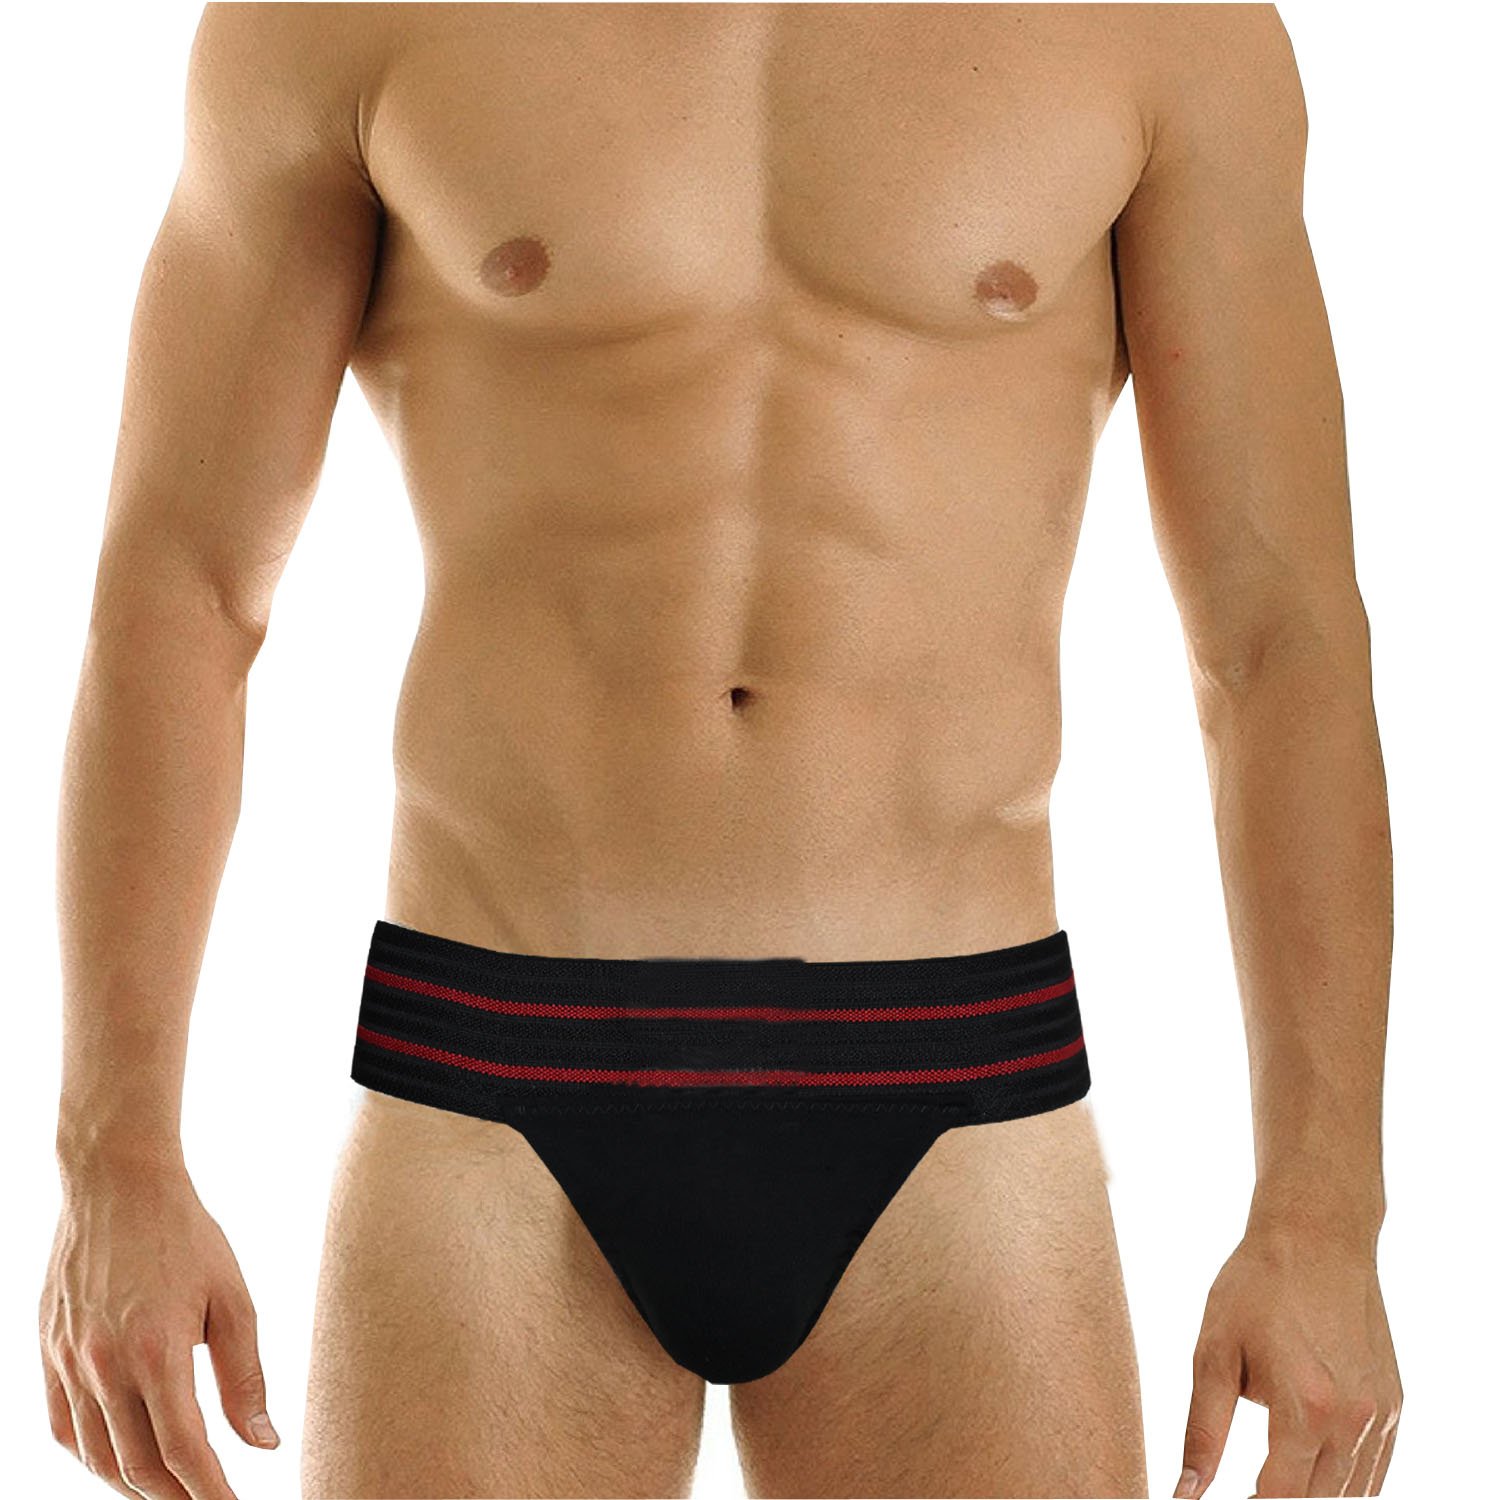 Men’s G-String Do’s and Don’ts: Useful Tips You Should Know When Wearing Men’s G-Strings